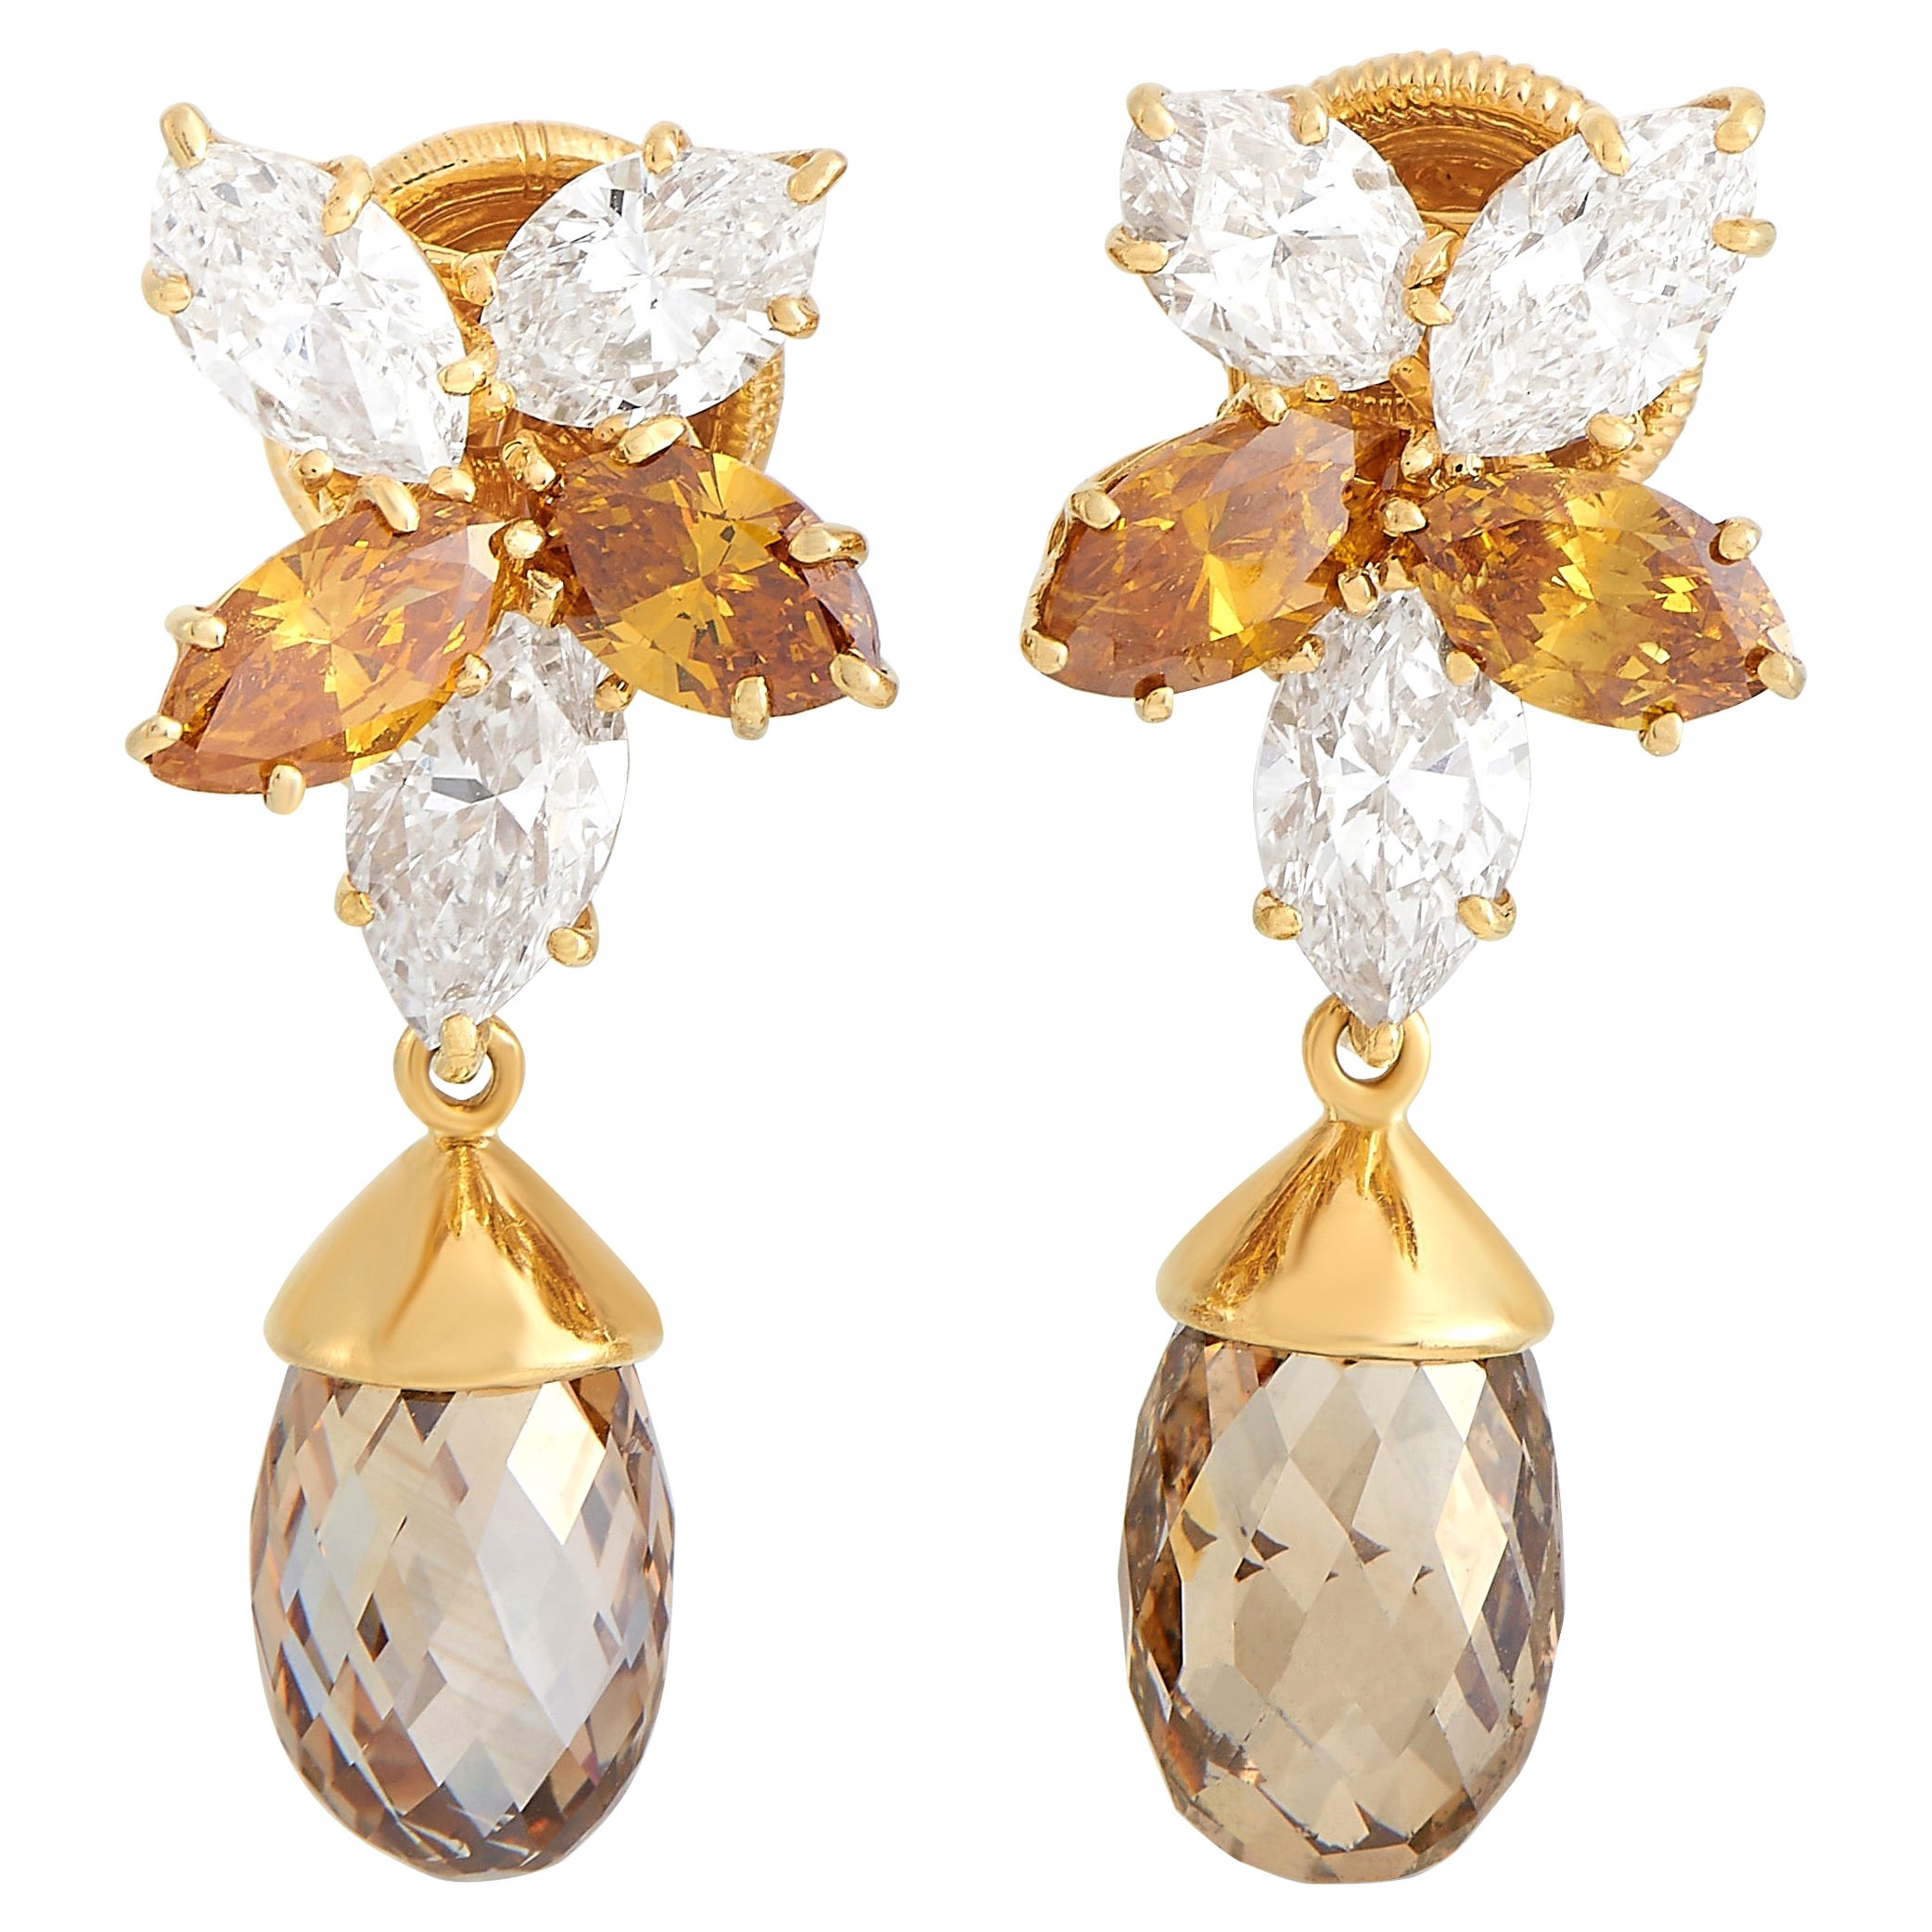 Harry Winston 18K Yellow Gold 6.00 Ct White and Colored Diamond Clip-On Earrings